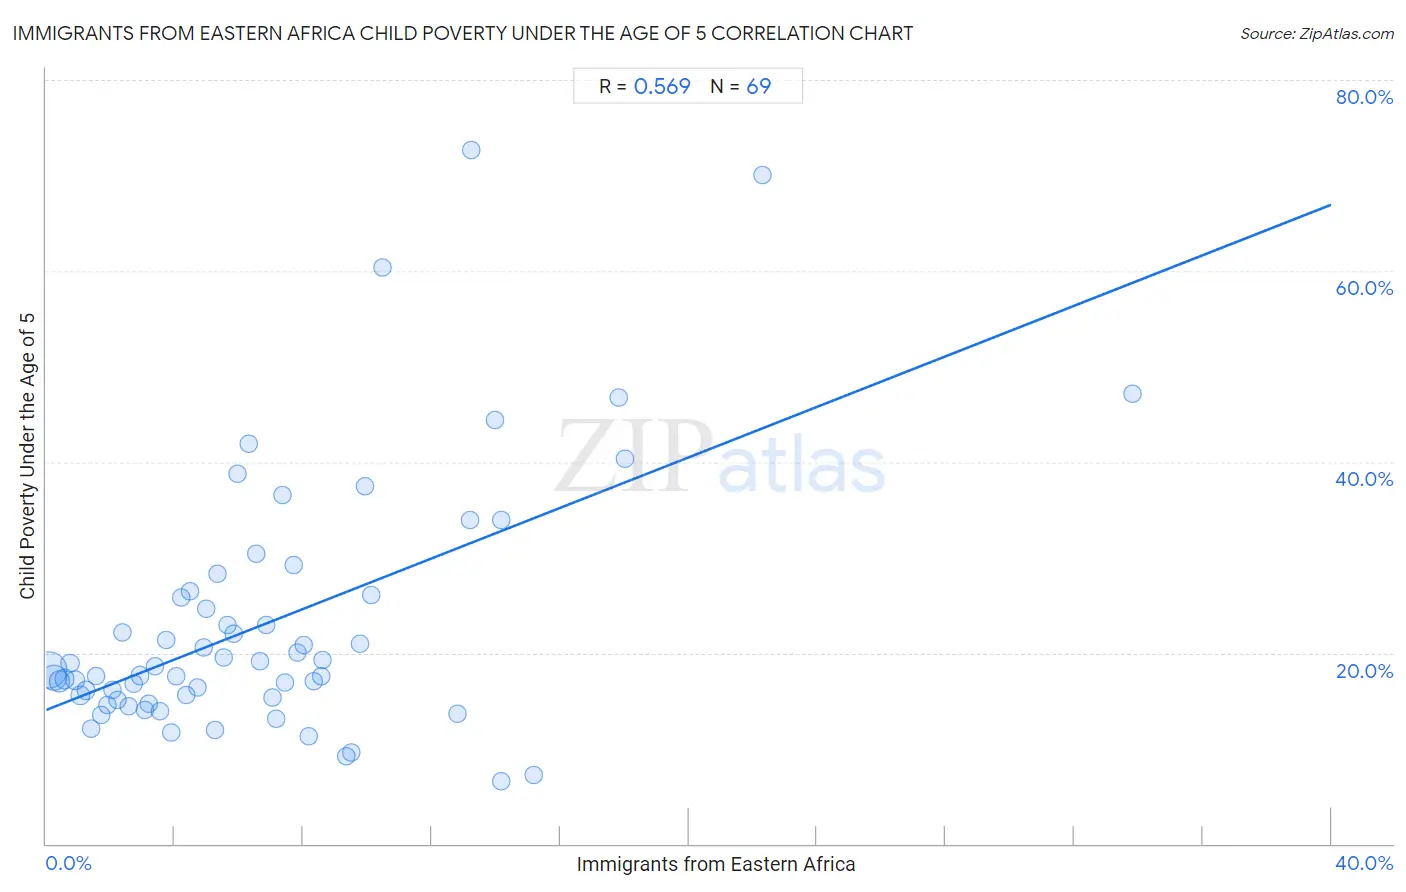 Immigrants from Eastern Africa Child Poverty Under the Age of 5